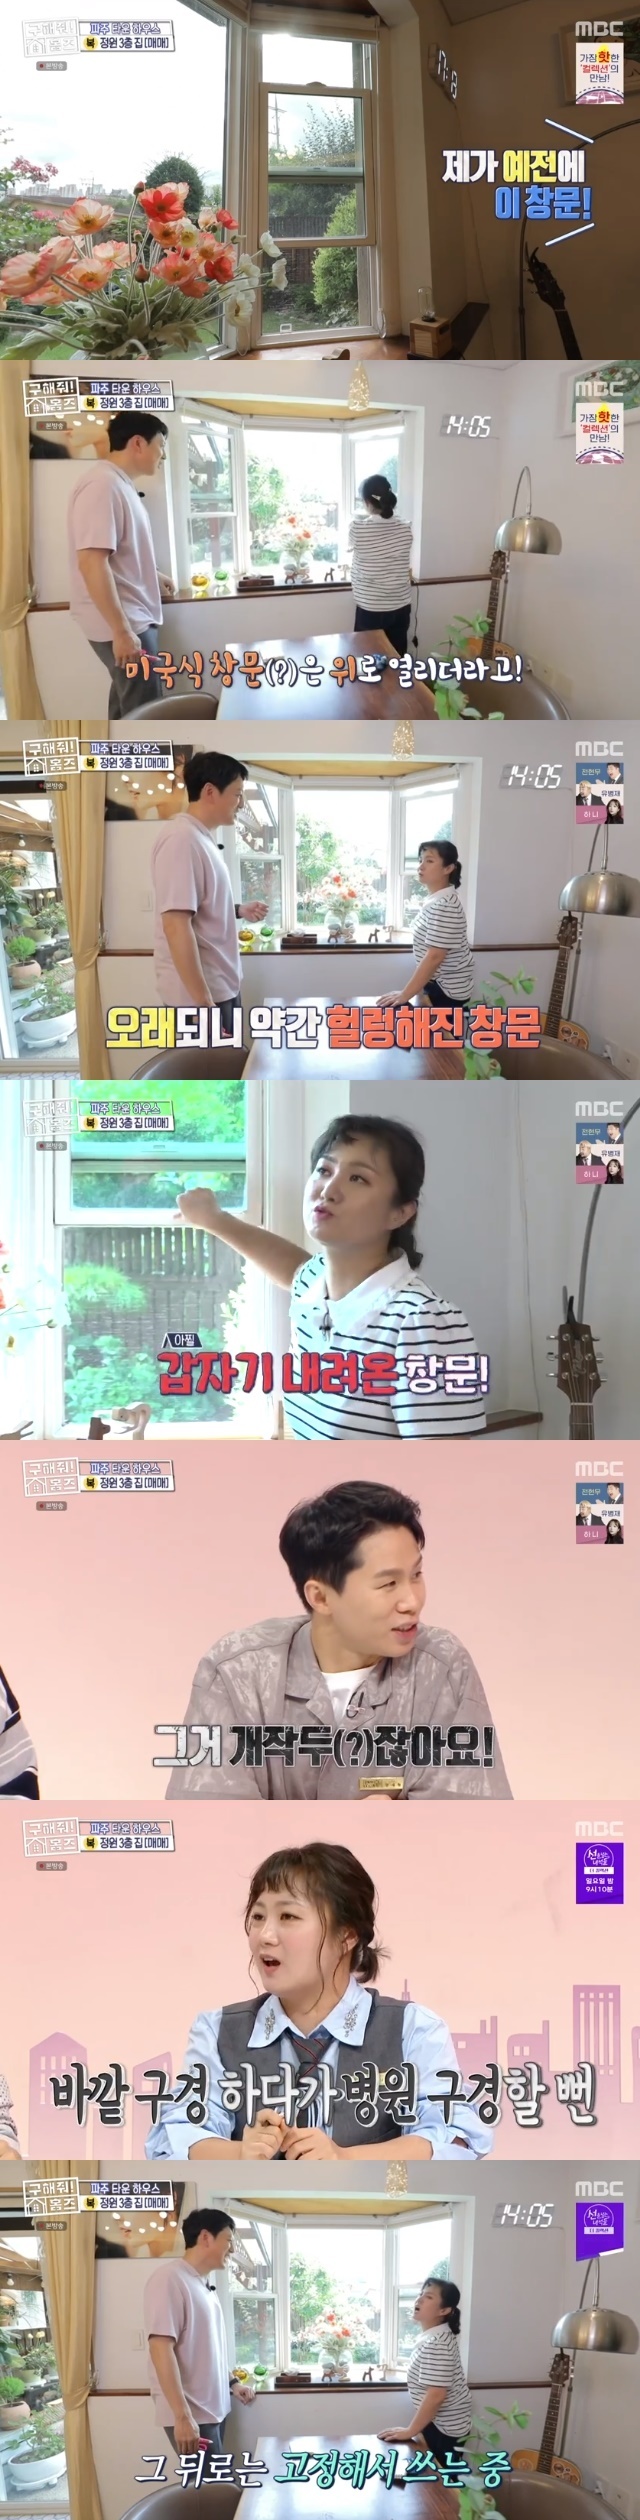 Broadcaster Park Na-rae reported a dizzying accident at home.In the 217th episode of MBCs entertainment show Where is My Home (hereinafter referred to as Homes), which aired on August 31, The Client, who visits a house in Paju and Namyangju to live with his parents and Pet, appeared. The budget was up to 600 million won.On this day, Park Na-rae looked at a three-story house in Paju and found Facing Windows, a Western-style wooden building.Park Na-rae recalled that his house was once such a Facing Windows, saying, It opens up American Facing Windows.The problem was that it was old and a bit loose, so I was looking out at Facing Windows and it came down. Yang likened it to thats a rewrite, and Park Na-rae said, It was a close call.I was surprised, he said. Im using it as a fix window after that. 